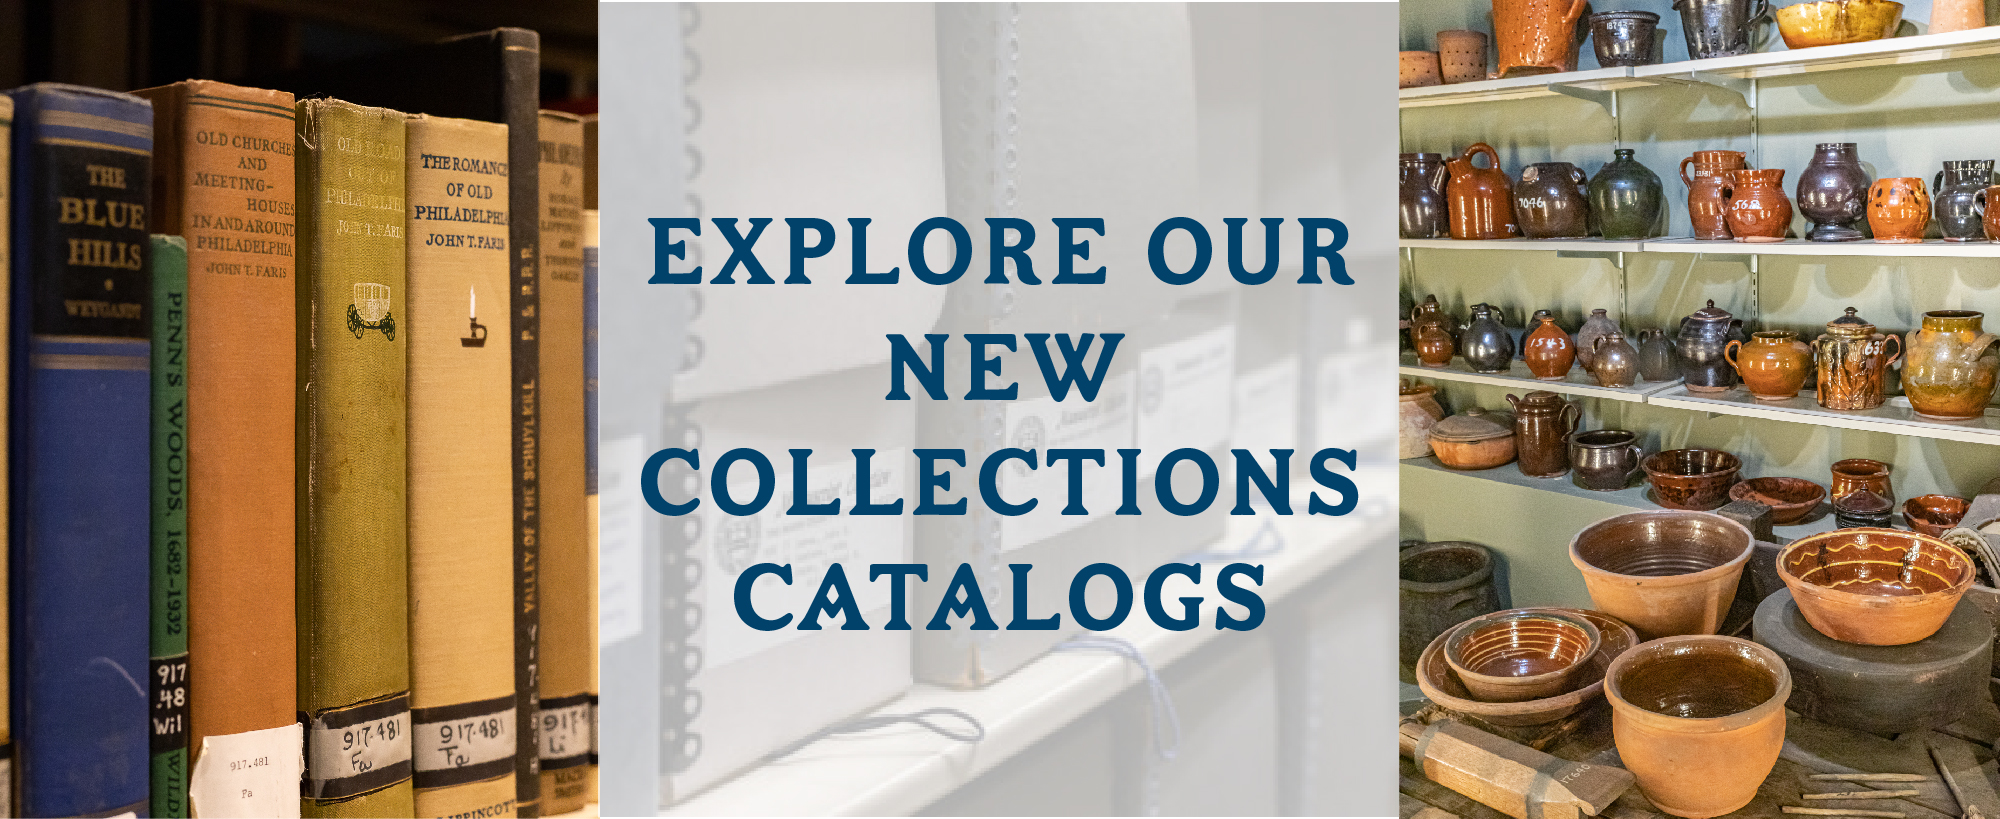 NewCollectionsCatalogs